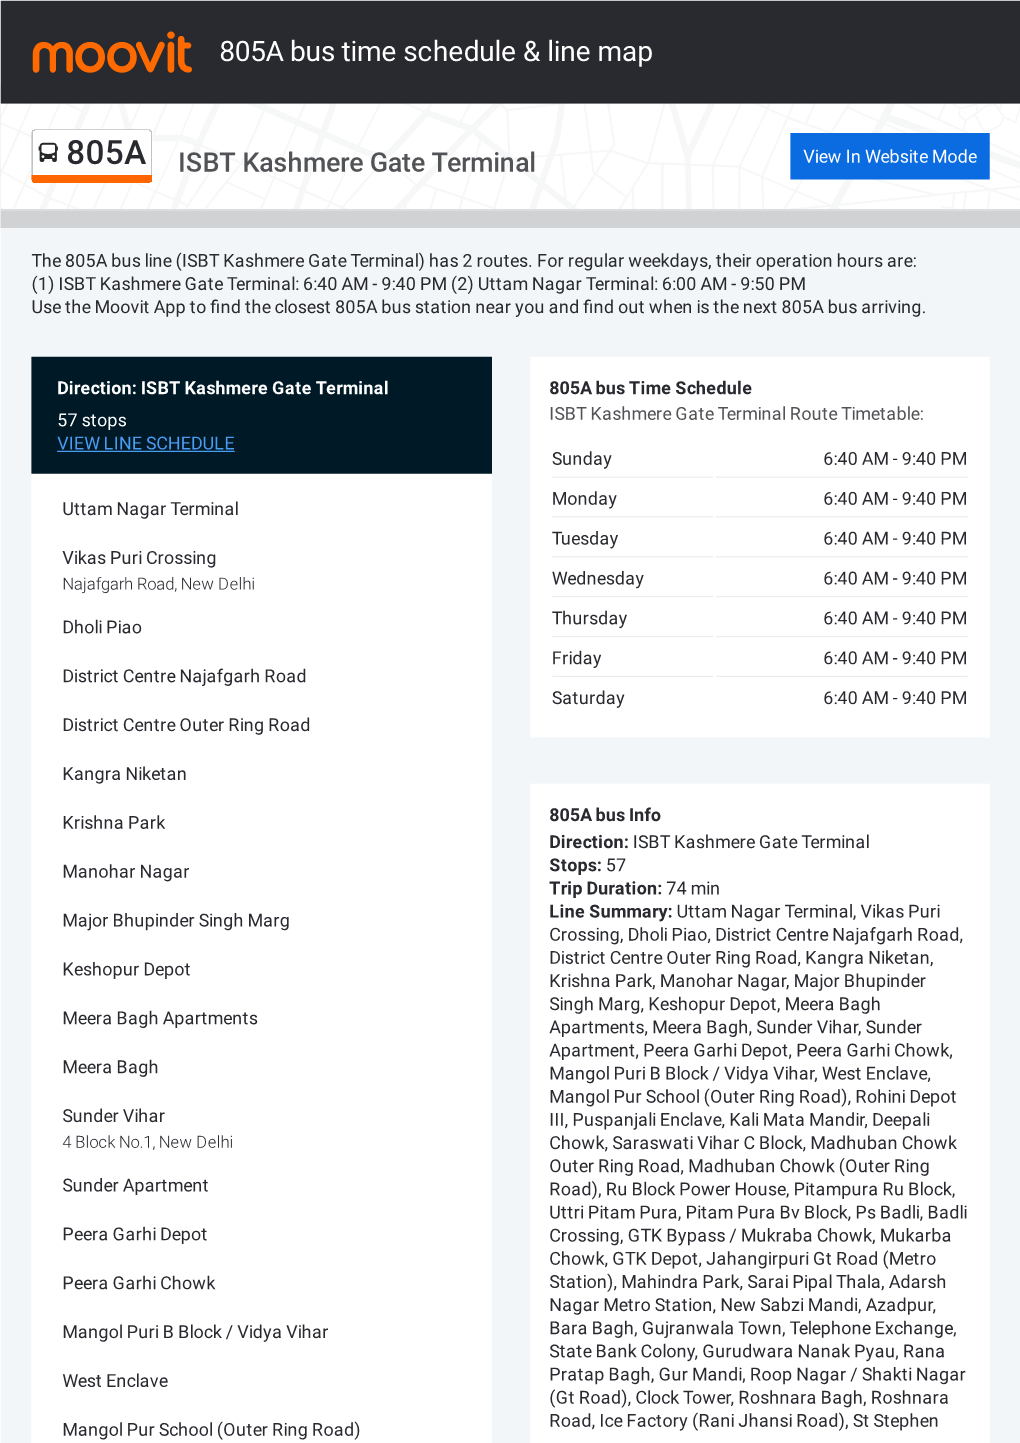 805A Bus Time Schedule & Line Route